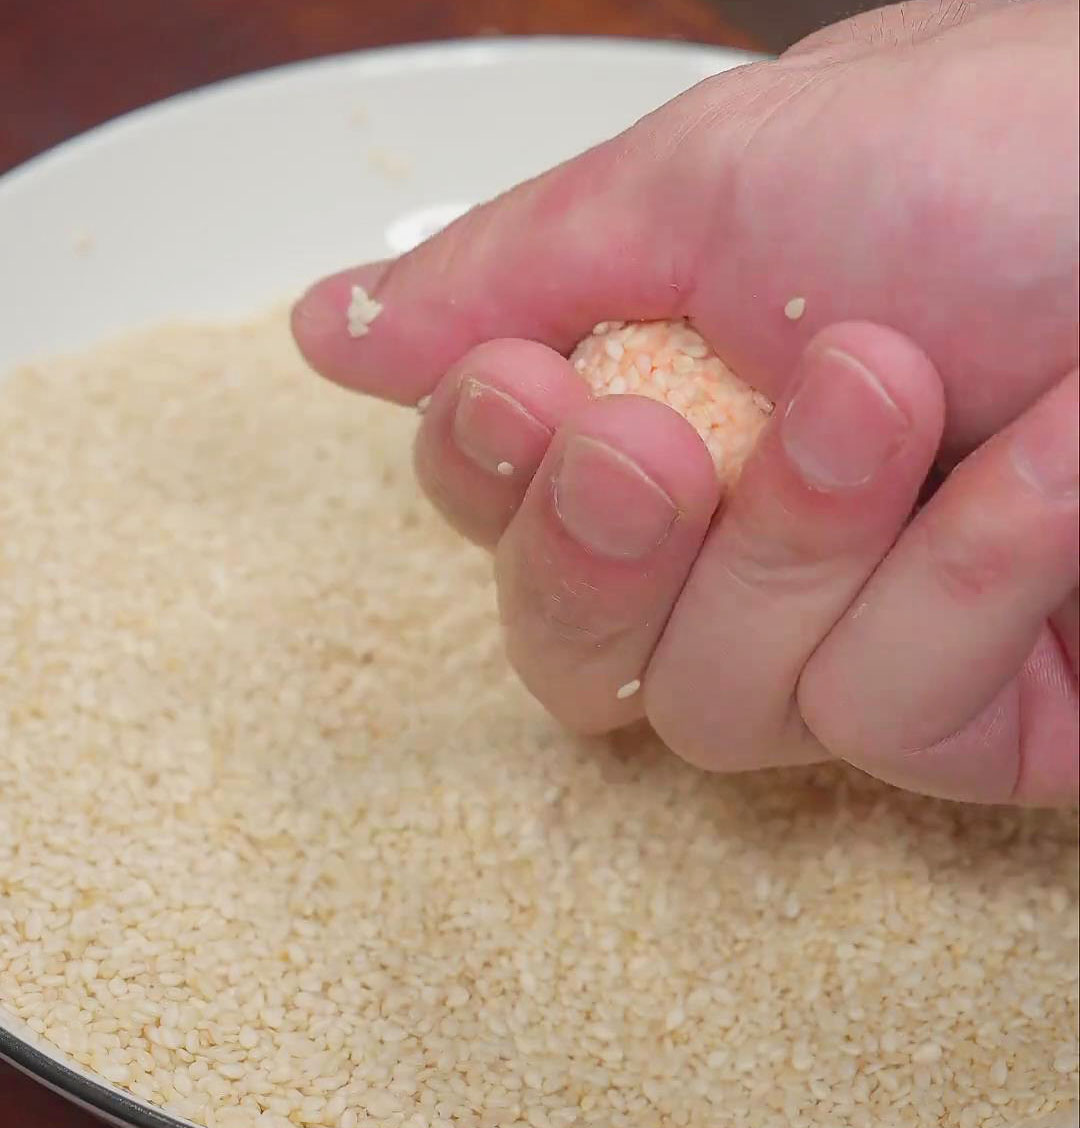 press the sesame seeds onto the balls to let them attach firmly